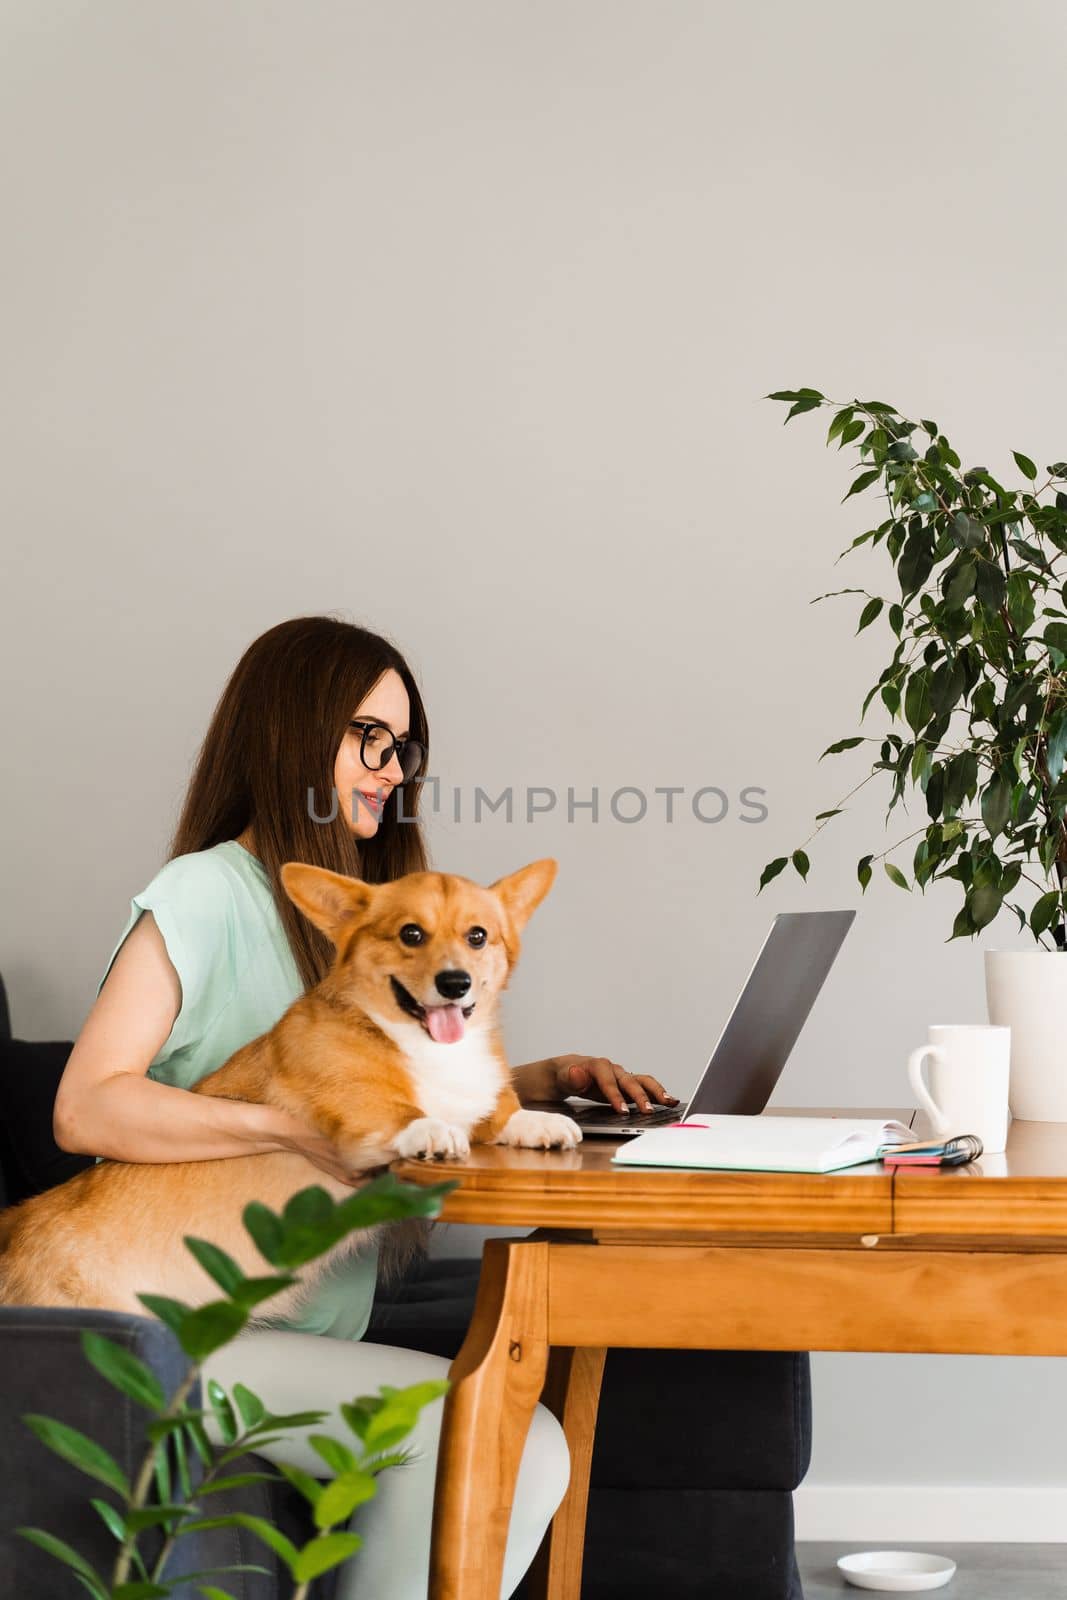 Business woman in glasses working on laptop online and hug Corgi dog. IT specialist girl working remotely and petting her dog with Welsh Corgi Pembroke. Lifestyle with domestic pet at home. by Rabizo